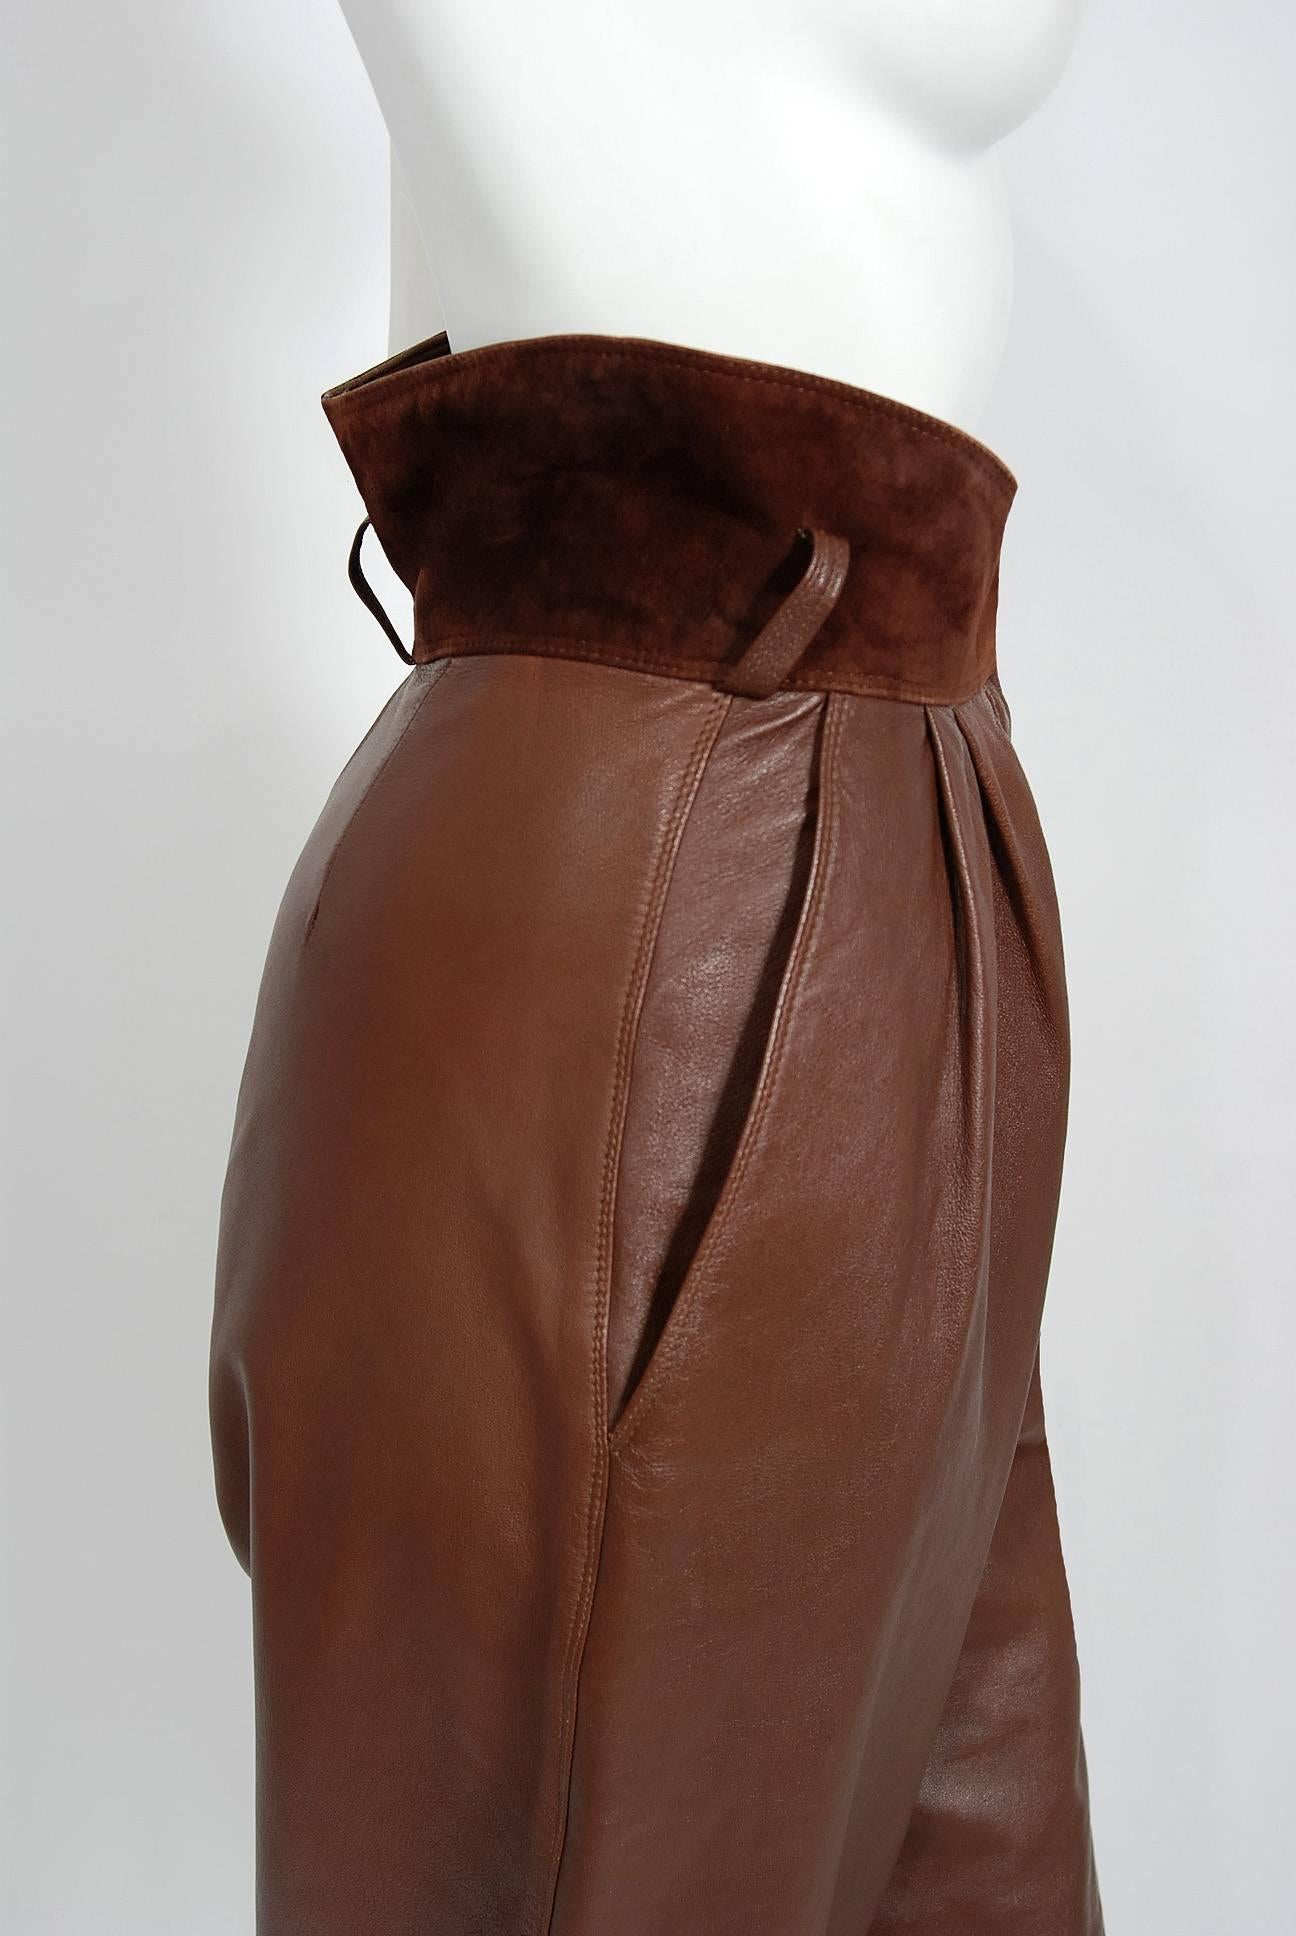 1984 Gianni Versace Couture Studded Brown Leather Vest and High Waist Pants In Excellent Condition In Beverly Hills, CA